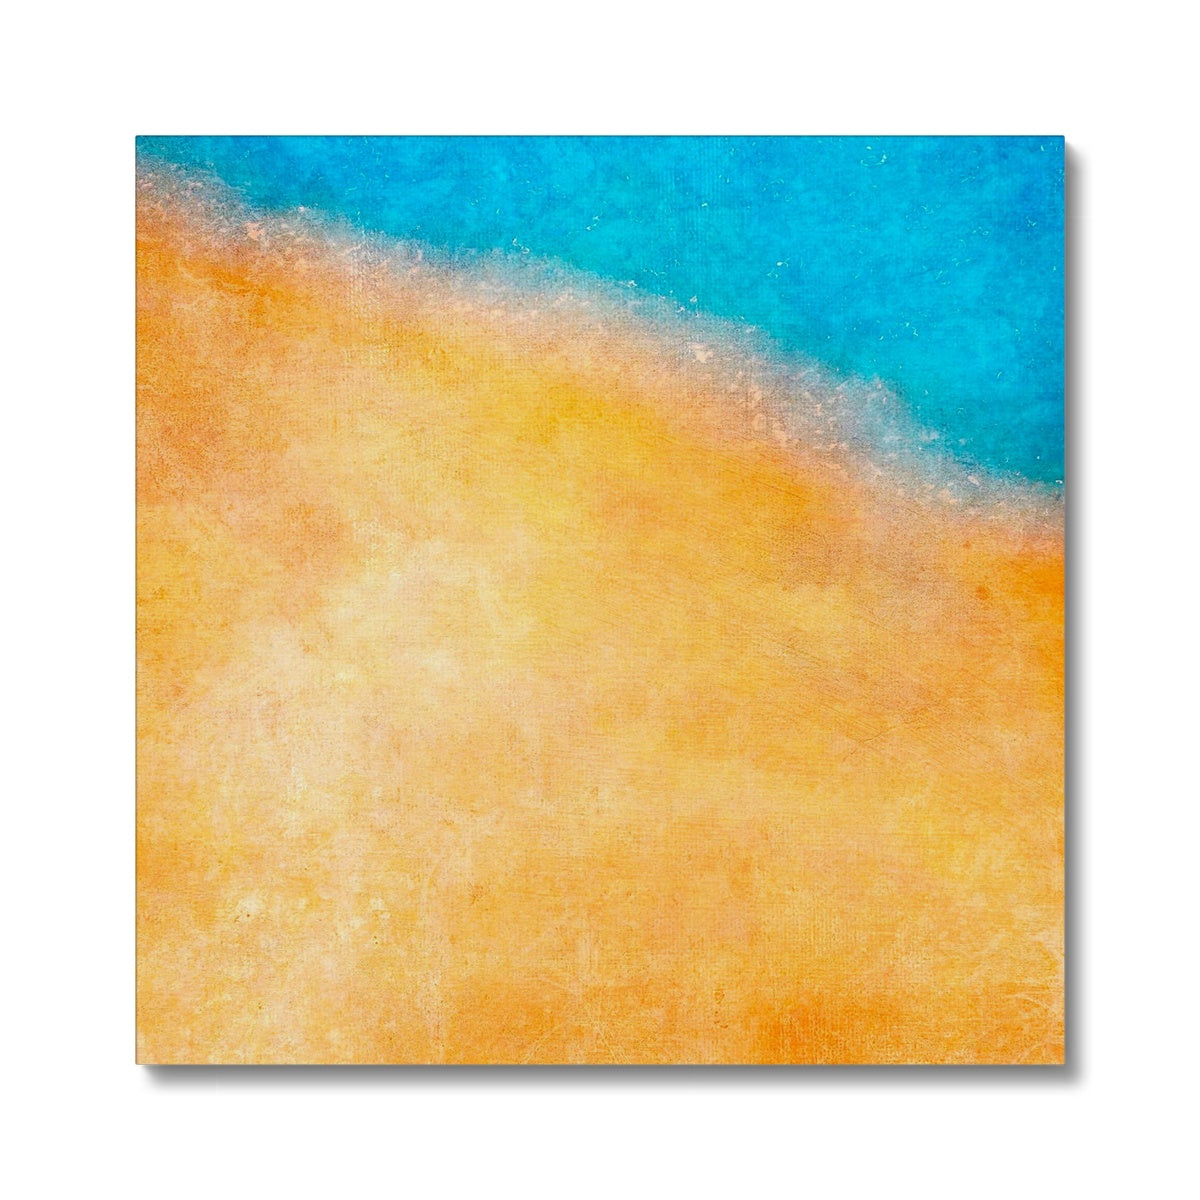 The Shoreline Abstract Painting | Canvas From Scotland-Contemporary Stretched Canvas Prints-Abstract & Impressionistic Art Gallery-24"x24"-Paintings, Prints, Homeware, Art Gifts From Scotland By Scottish Artist Kevin Hunter